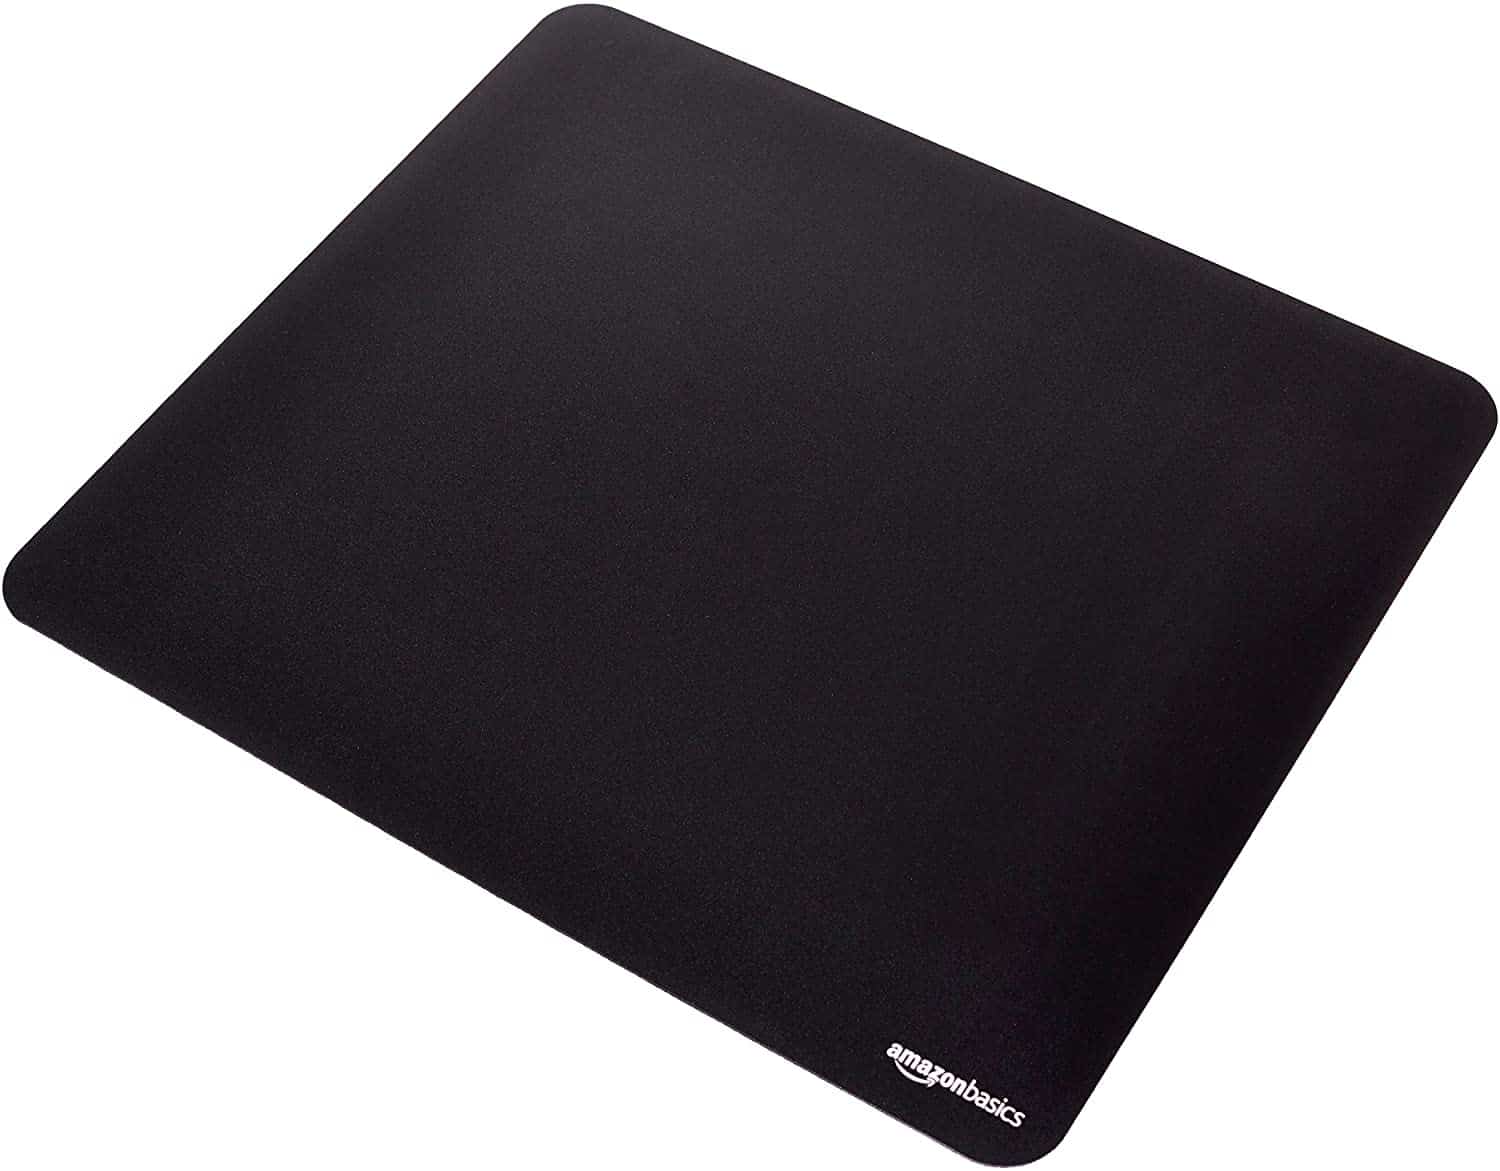  Large Mouse pad 